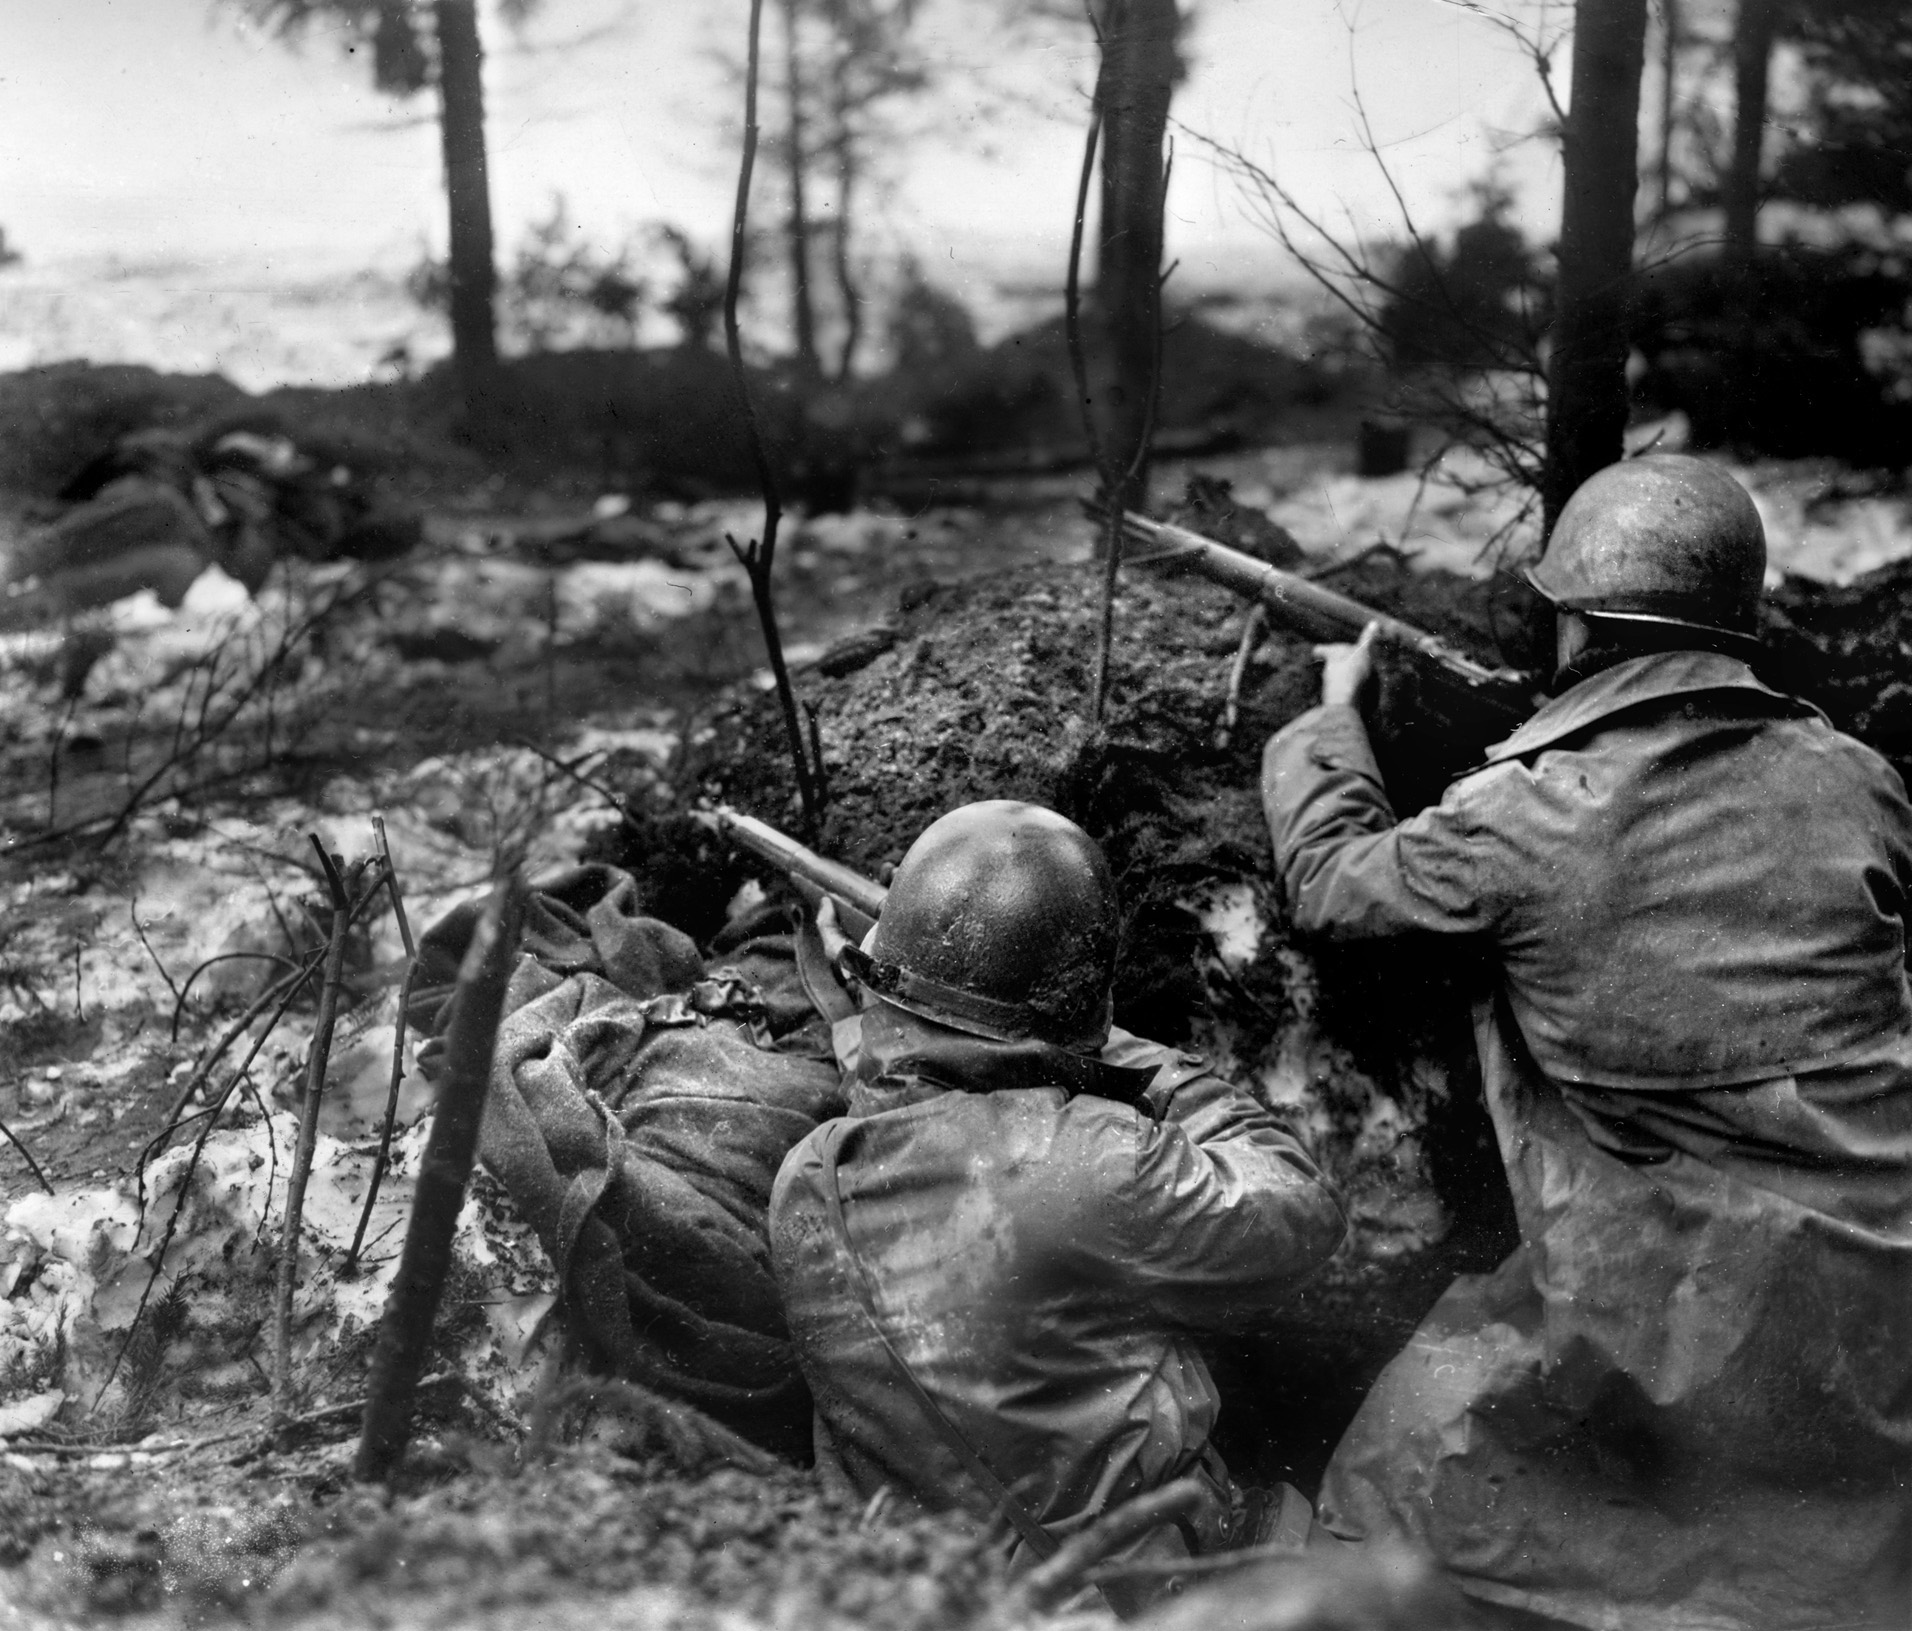 Their foxhole reinforced with logs, a pair of American soldiers of the 99th Infantry Division watch and wait for a German attack during the Battle of the Bulge. The heroic stand at Lanzerath by 20 year old Lt. Bouch and the 21 men under his command slowed the advance of Kampfgruppe Peiper.